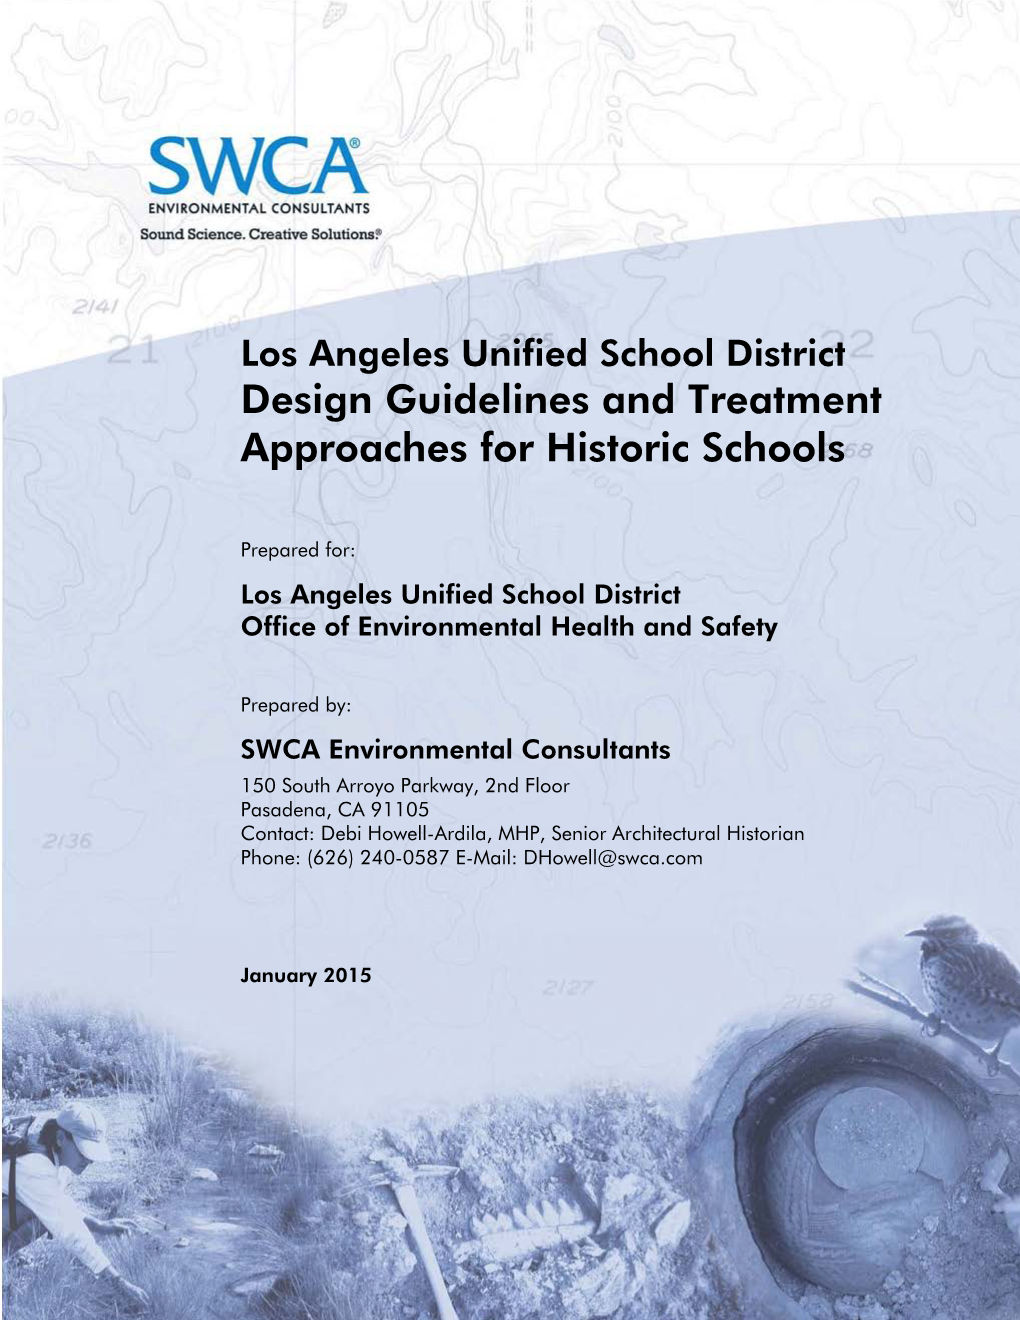 Design Guidelines and Treatment Approaches for Historic Schools